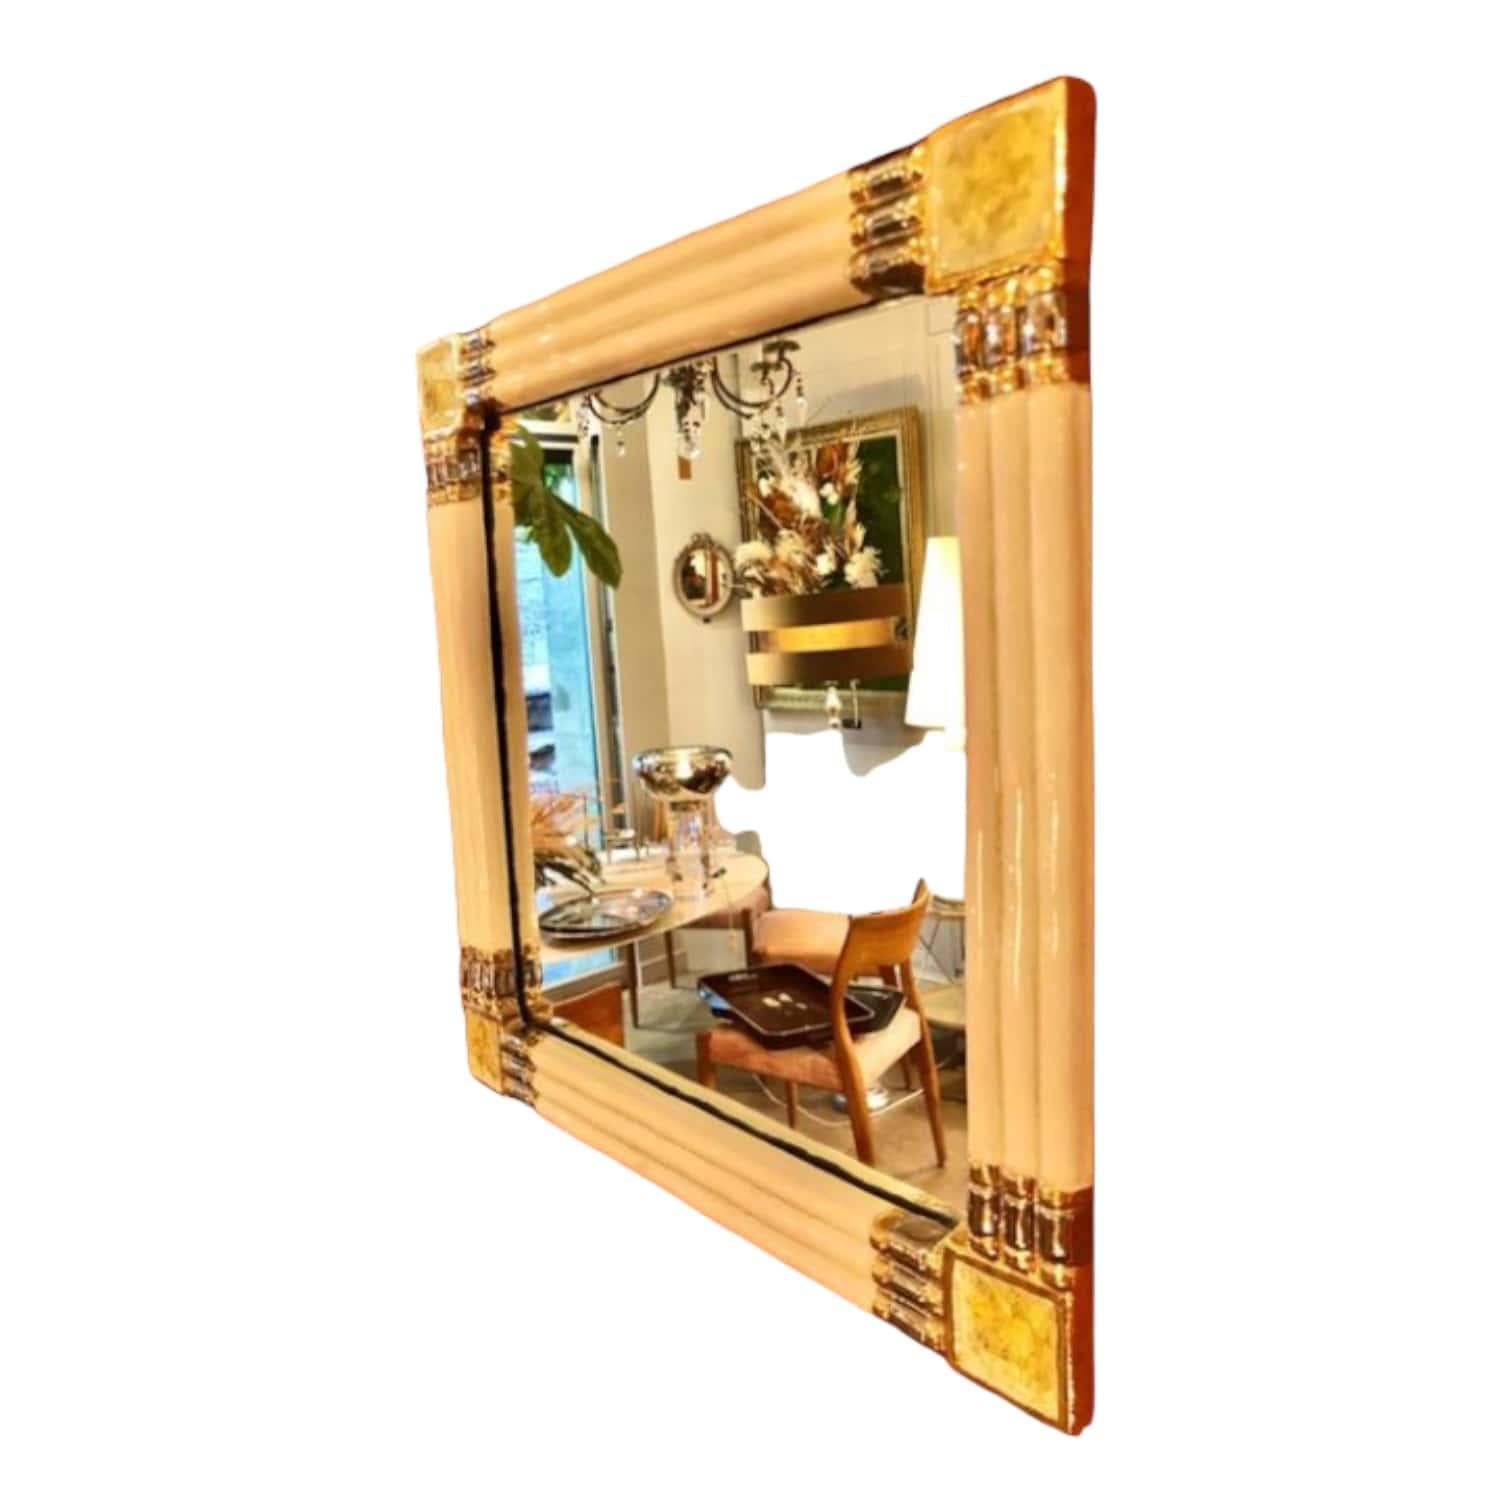 Discover this magnificent mirror by Marion de Crecy, Mithé Espelt 's daughter, a true work of art in glazed ceramic. Designed in France around 1970, this antique object is a real treasure to add to your collection. Its unique design highlights